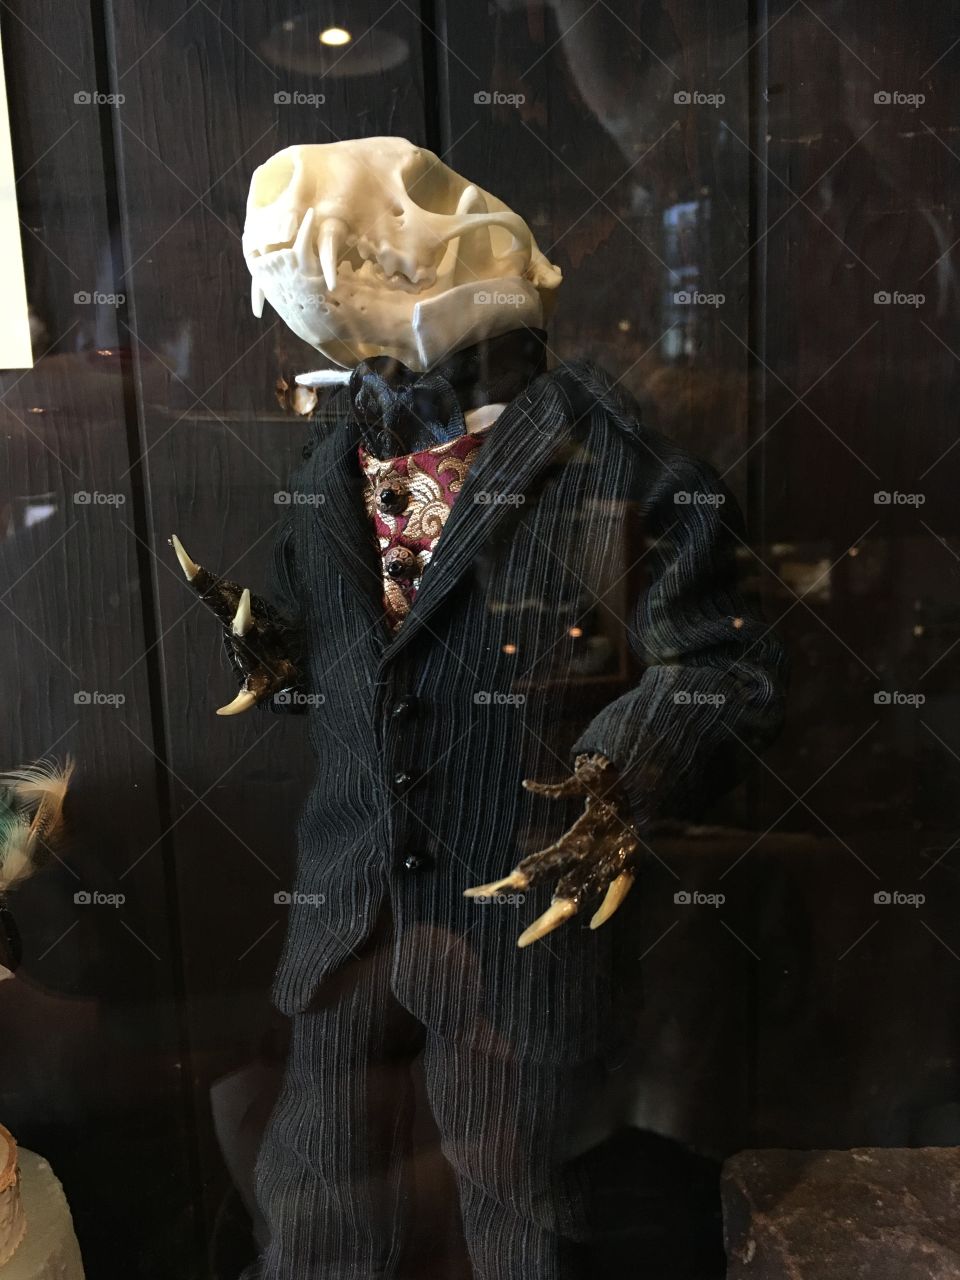 Taxidermy animal creation with a skeleton creature in a suit with bird feet